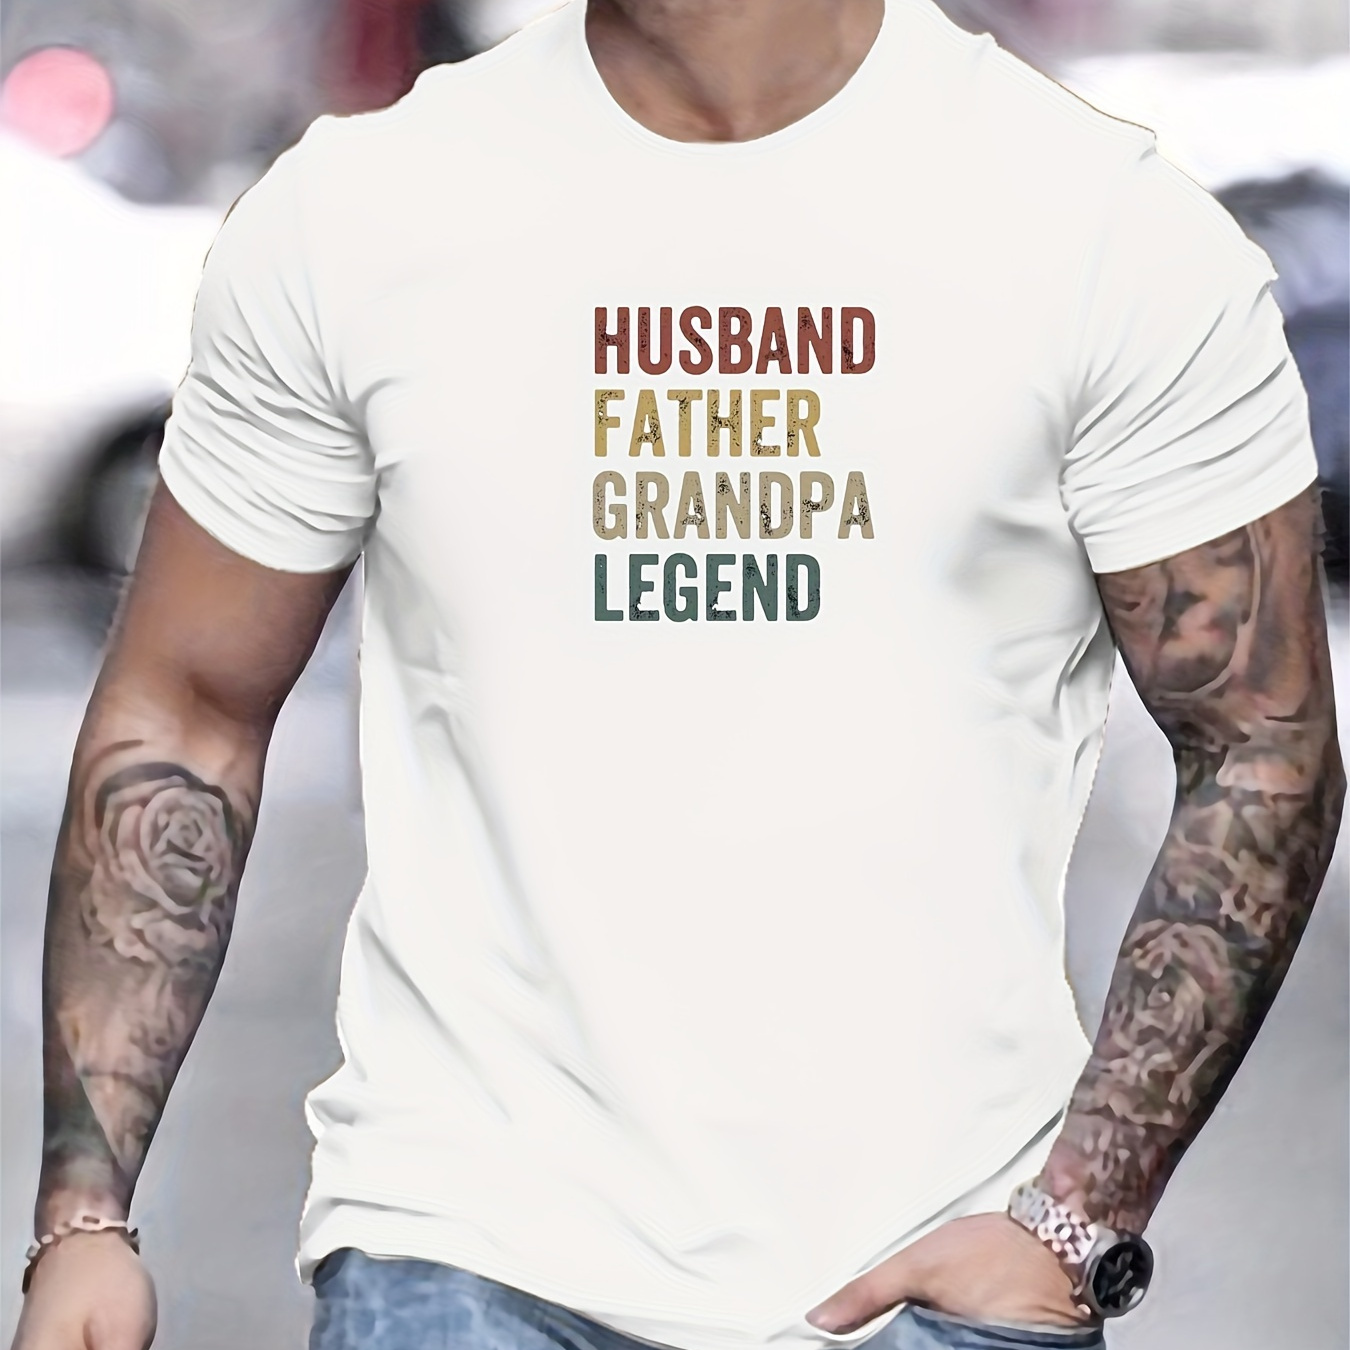 

' Husband Father Grandpa Legend ' Alphabet Print Men's T-shirt, Summer Short Sleeve Casual Top, Comfy Crew Neck Clothing For Daily Wear & Outdoor Fitness